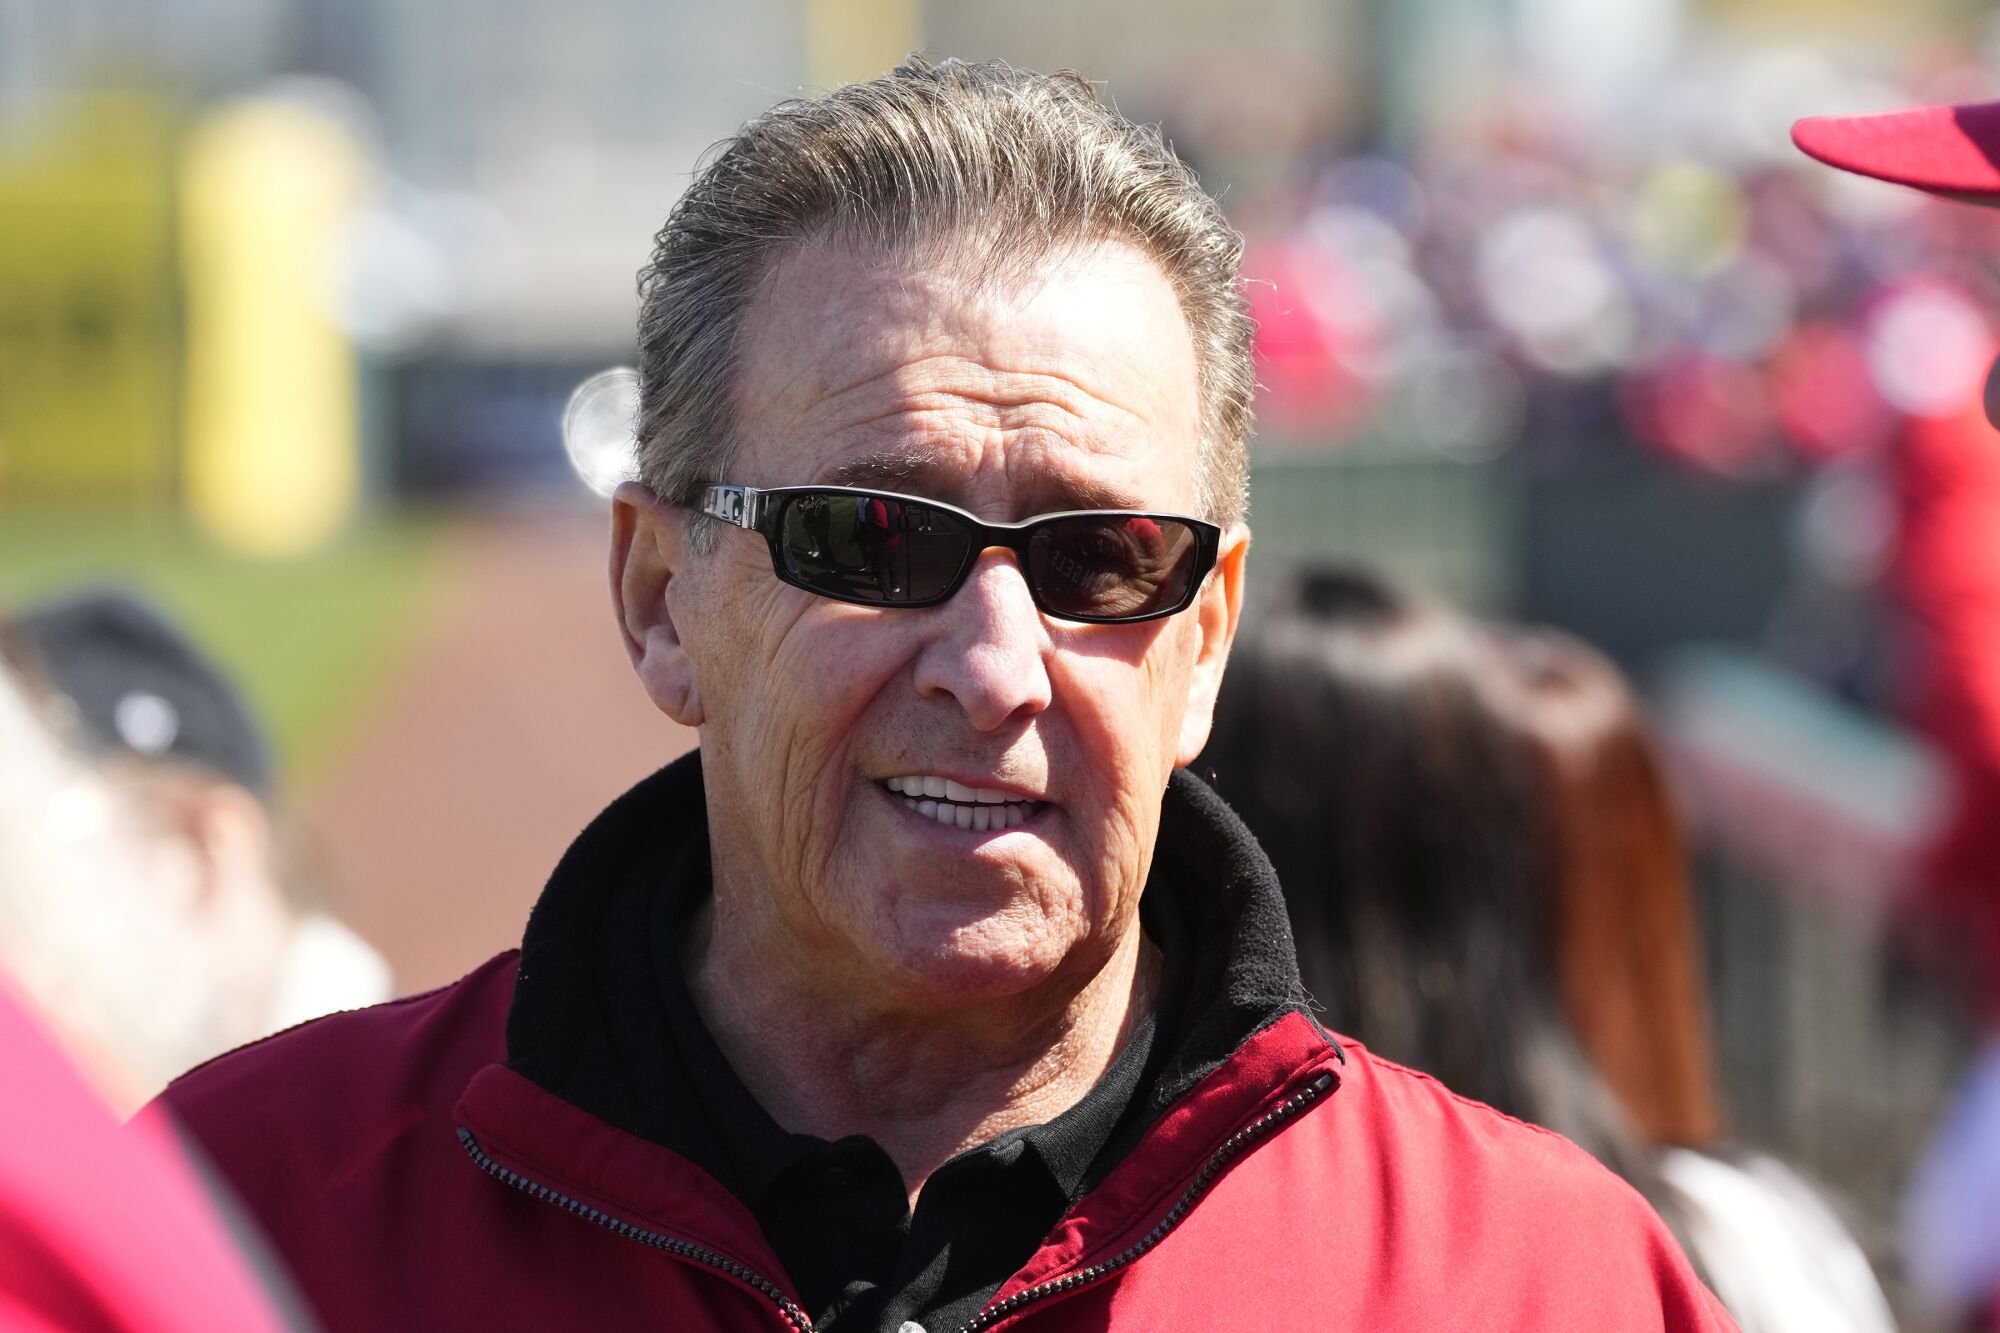 Angels owner Arte Moreno wearing sunglasses and a red zip-up jacket.